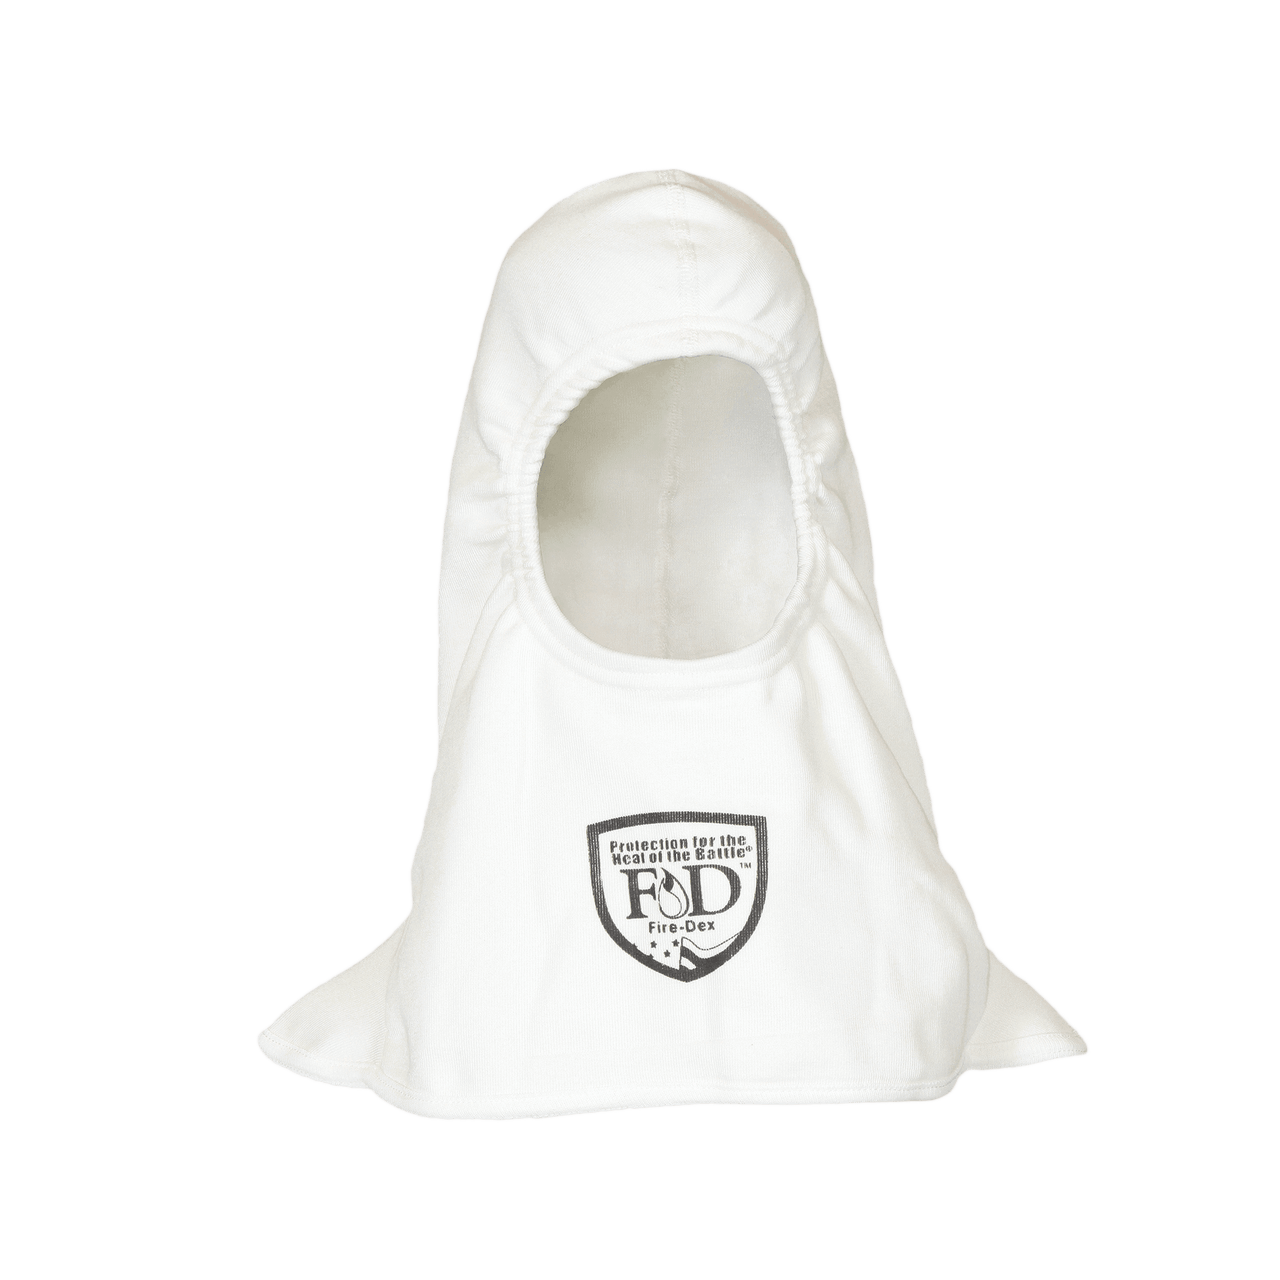 Fire-Dex H71 Classic Fire Hood | The Fire Center | Fuego Fire Center | Store | FIREFIGHTER GEAR | FREE SHIPPING | The H71 model is a 2-layer seamless bib with shoulder gusset. Certified to NFPA 1971.